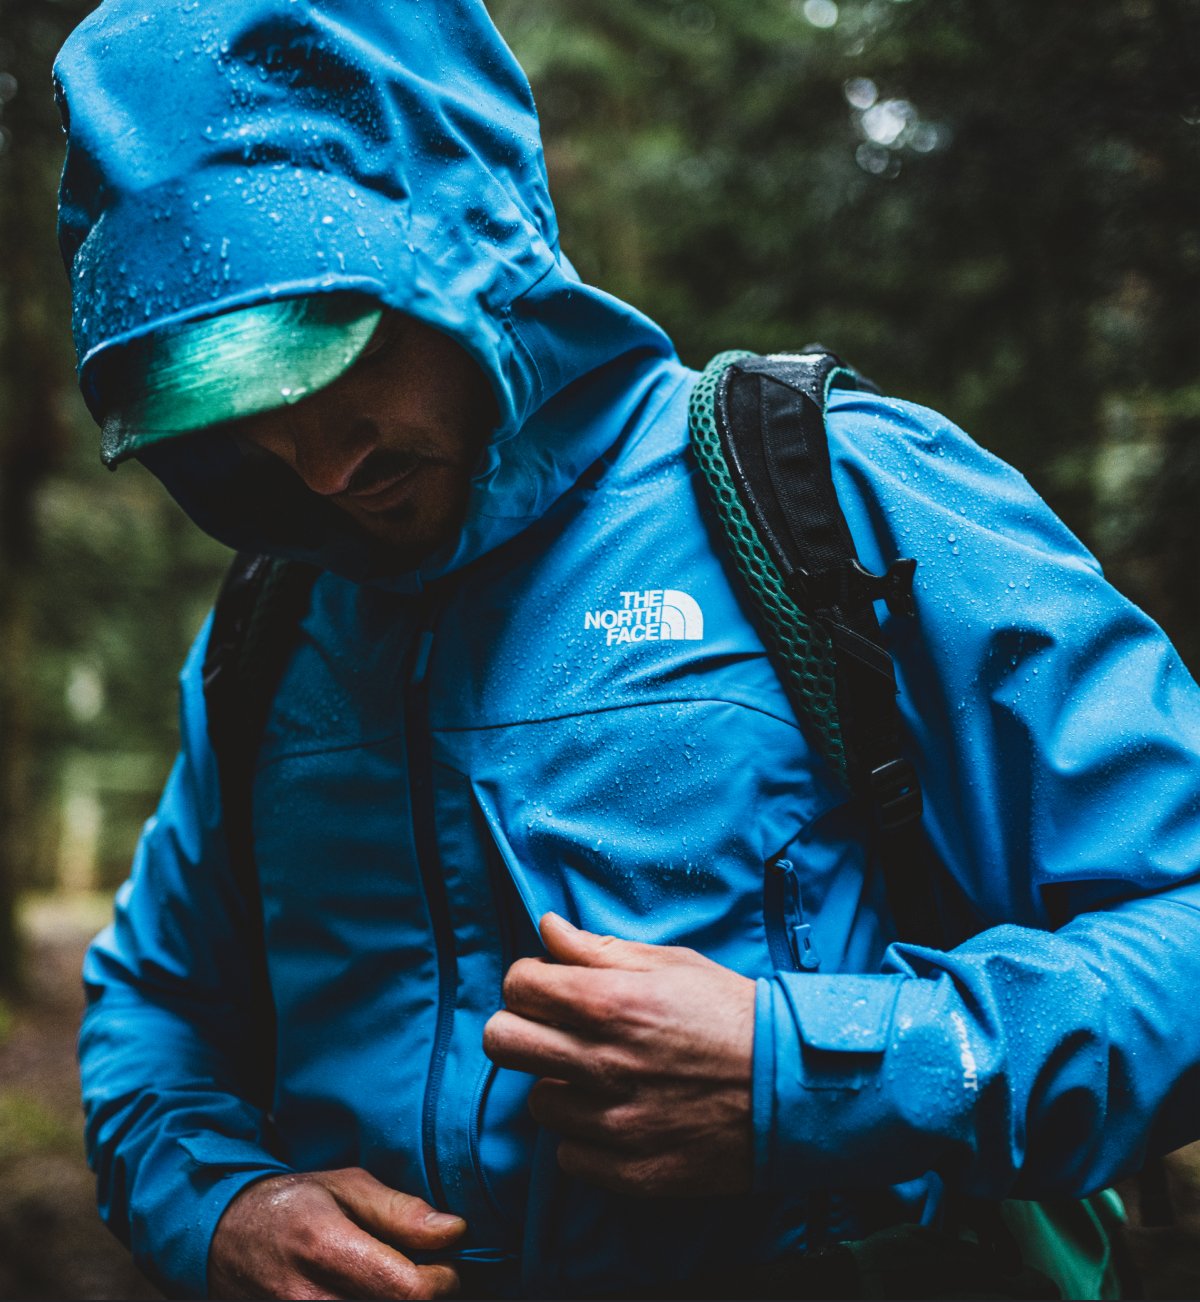 The North Face UK: New windproof and waterproof jackets